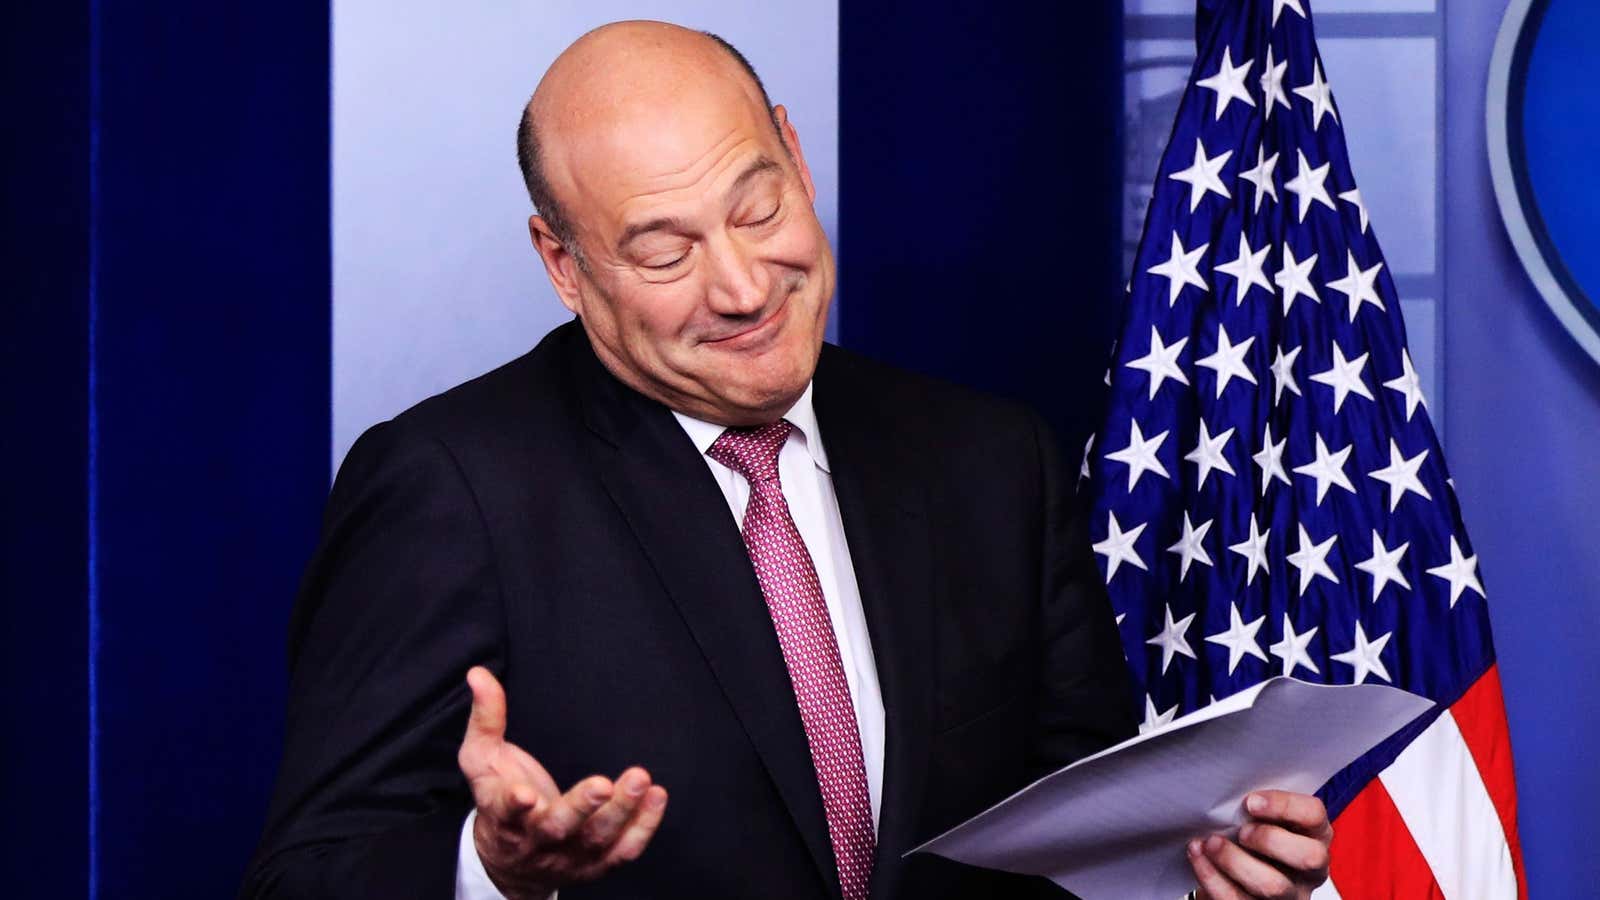 Cohn was offered five White House jobs in one meeting.